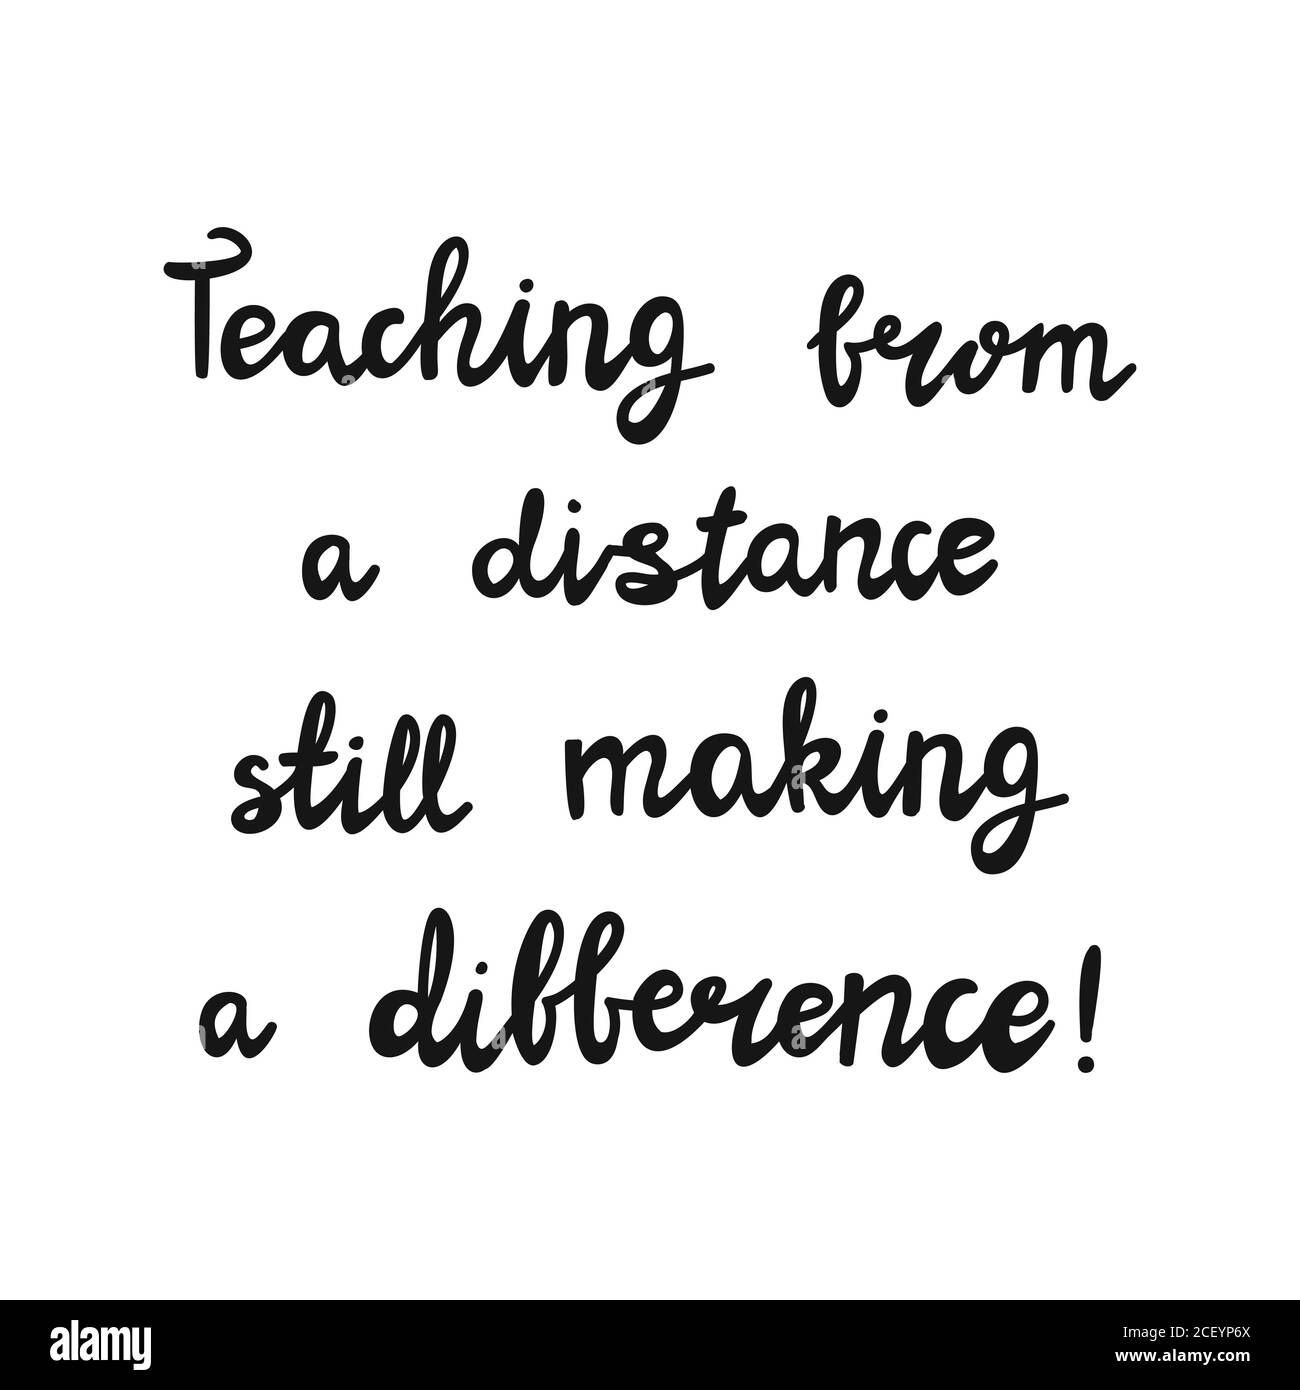 Teaching from a distance still making a difference. Handwritten education quote. Isolated on white background. Vector stock illustration. Stock Vector